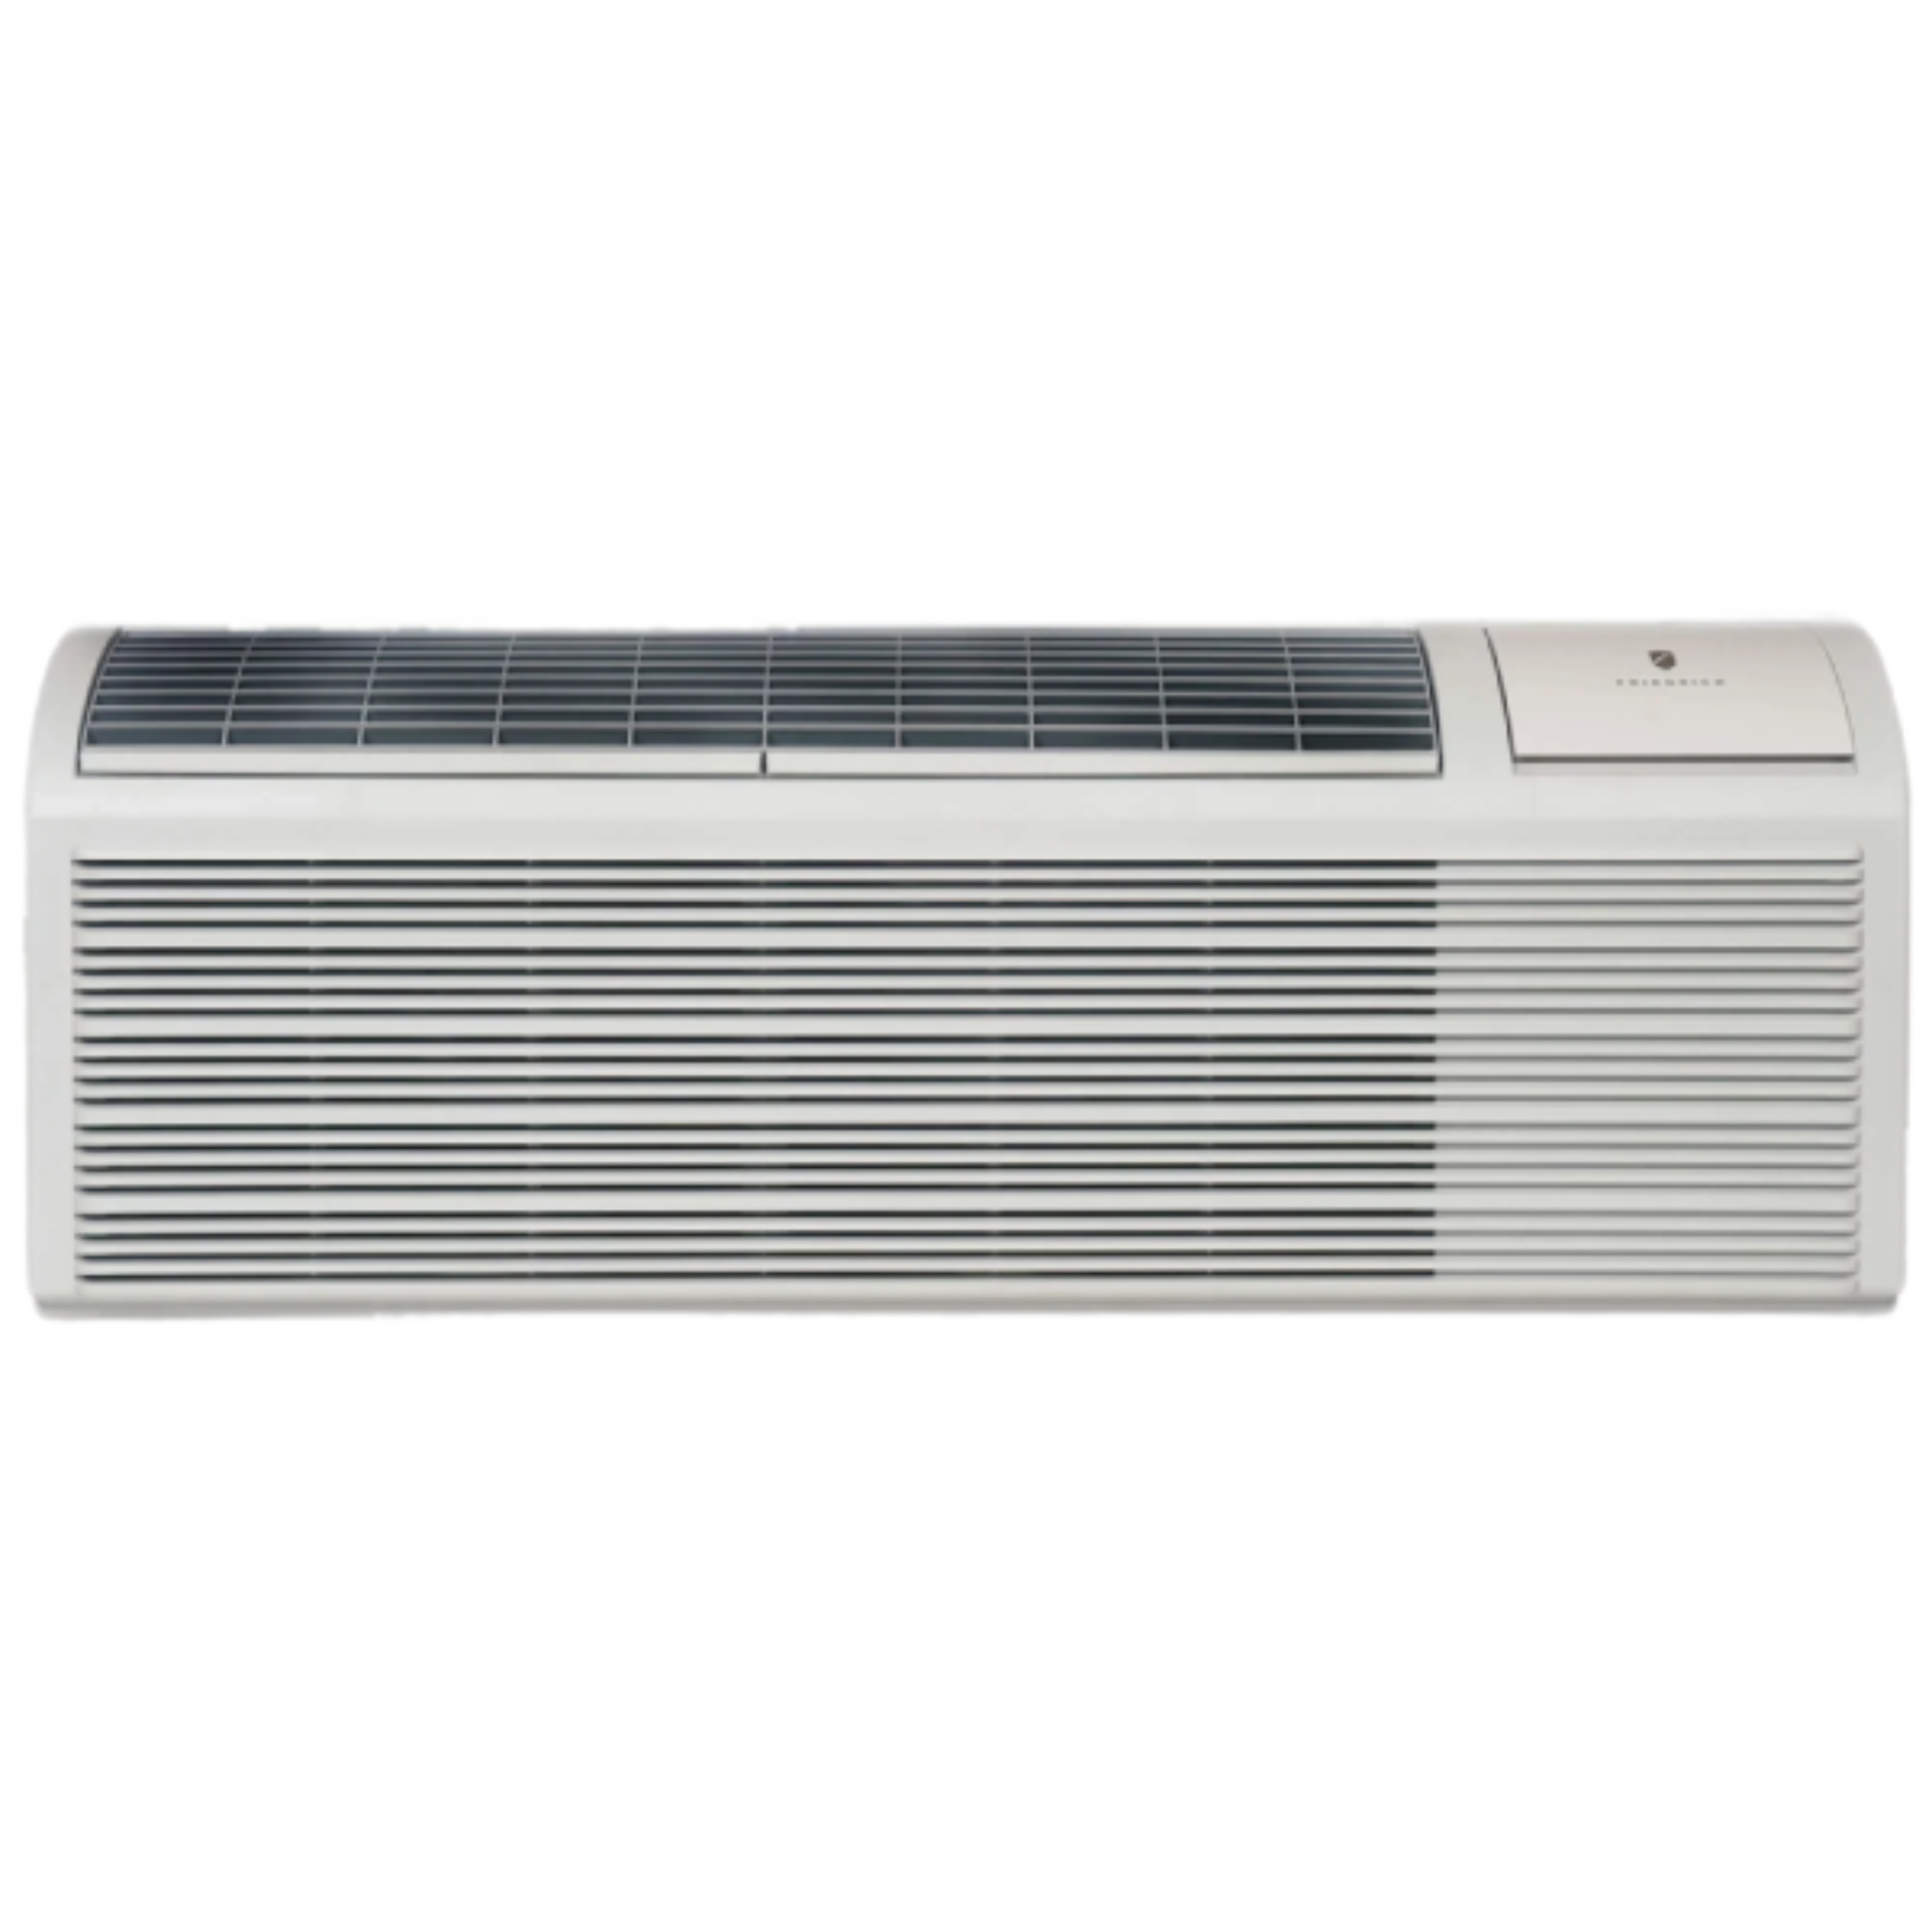 Friedrich ZoneAire Select Packaged Terminal Air Conditioner with Electric Heat Model PZE09K3SB, 11.5 EER, 265 V, 400 CFM, 9200 BTU